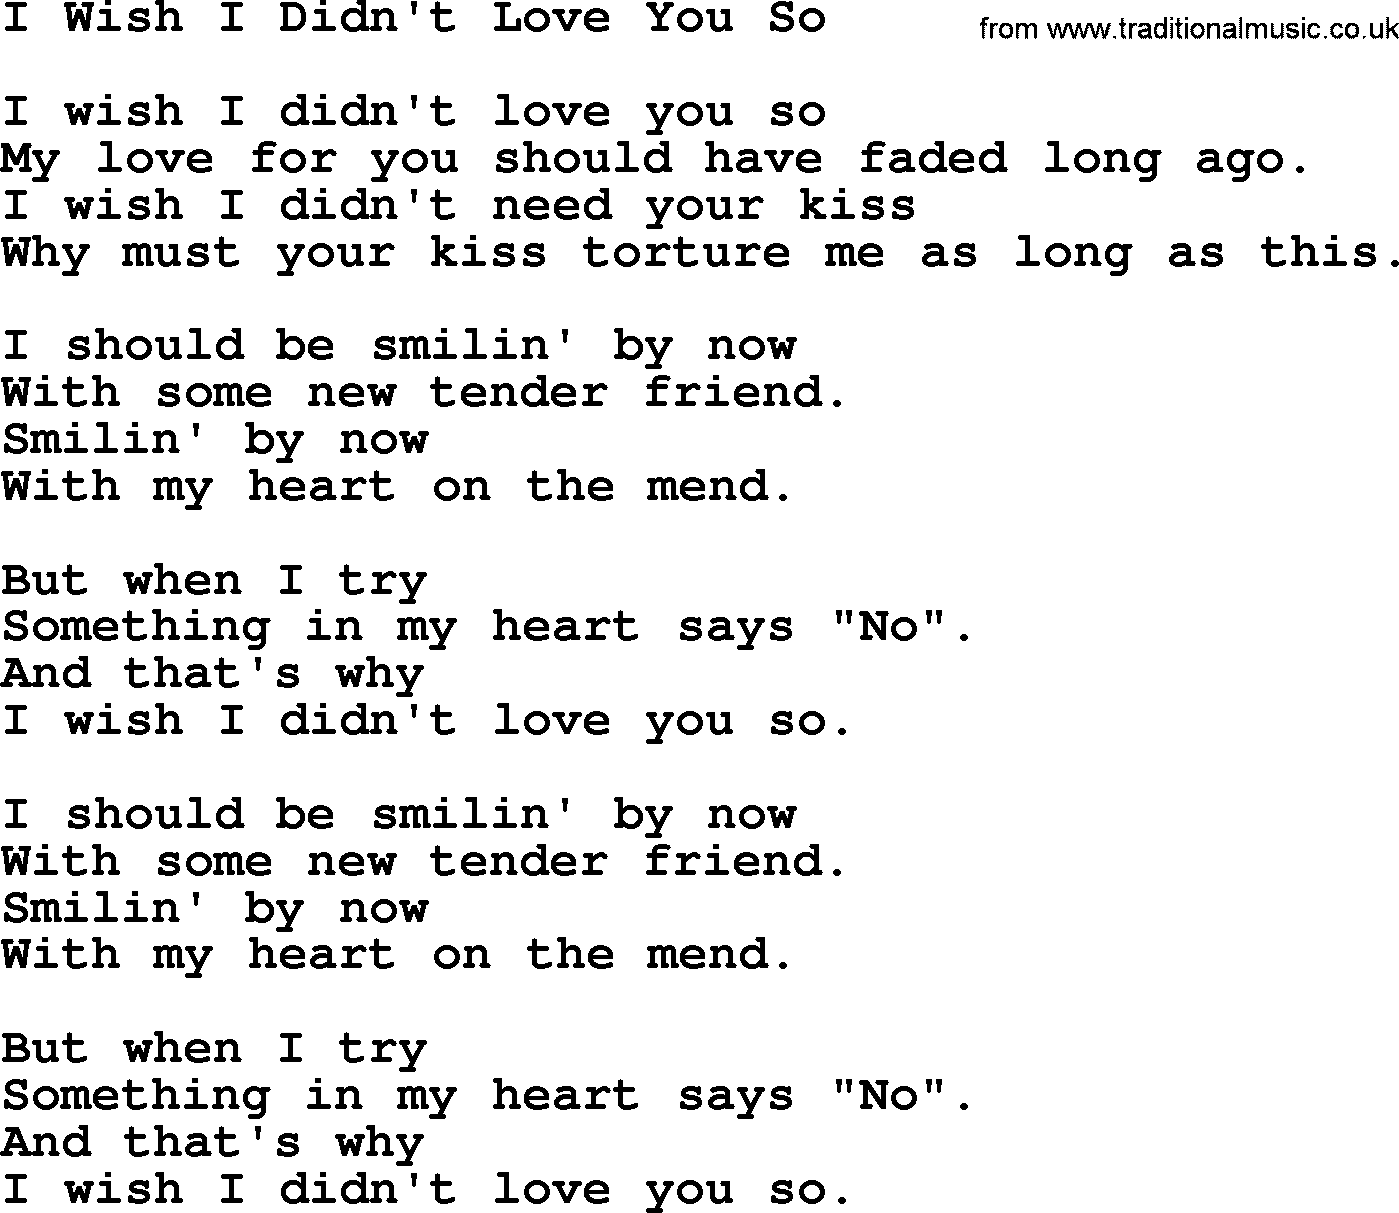 Willie Nelson song: I Wish I Didn't Love You So lyrics